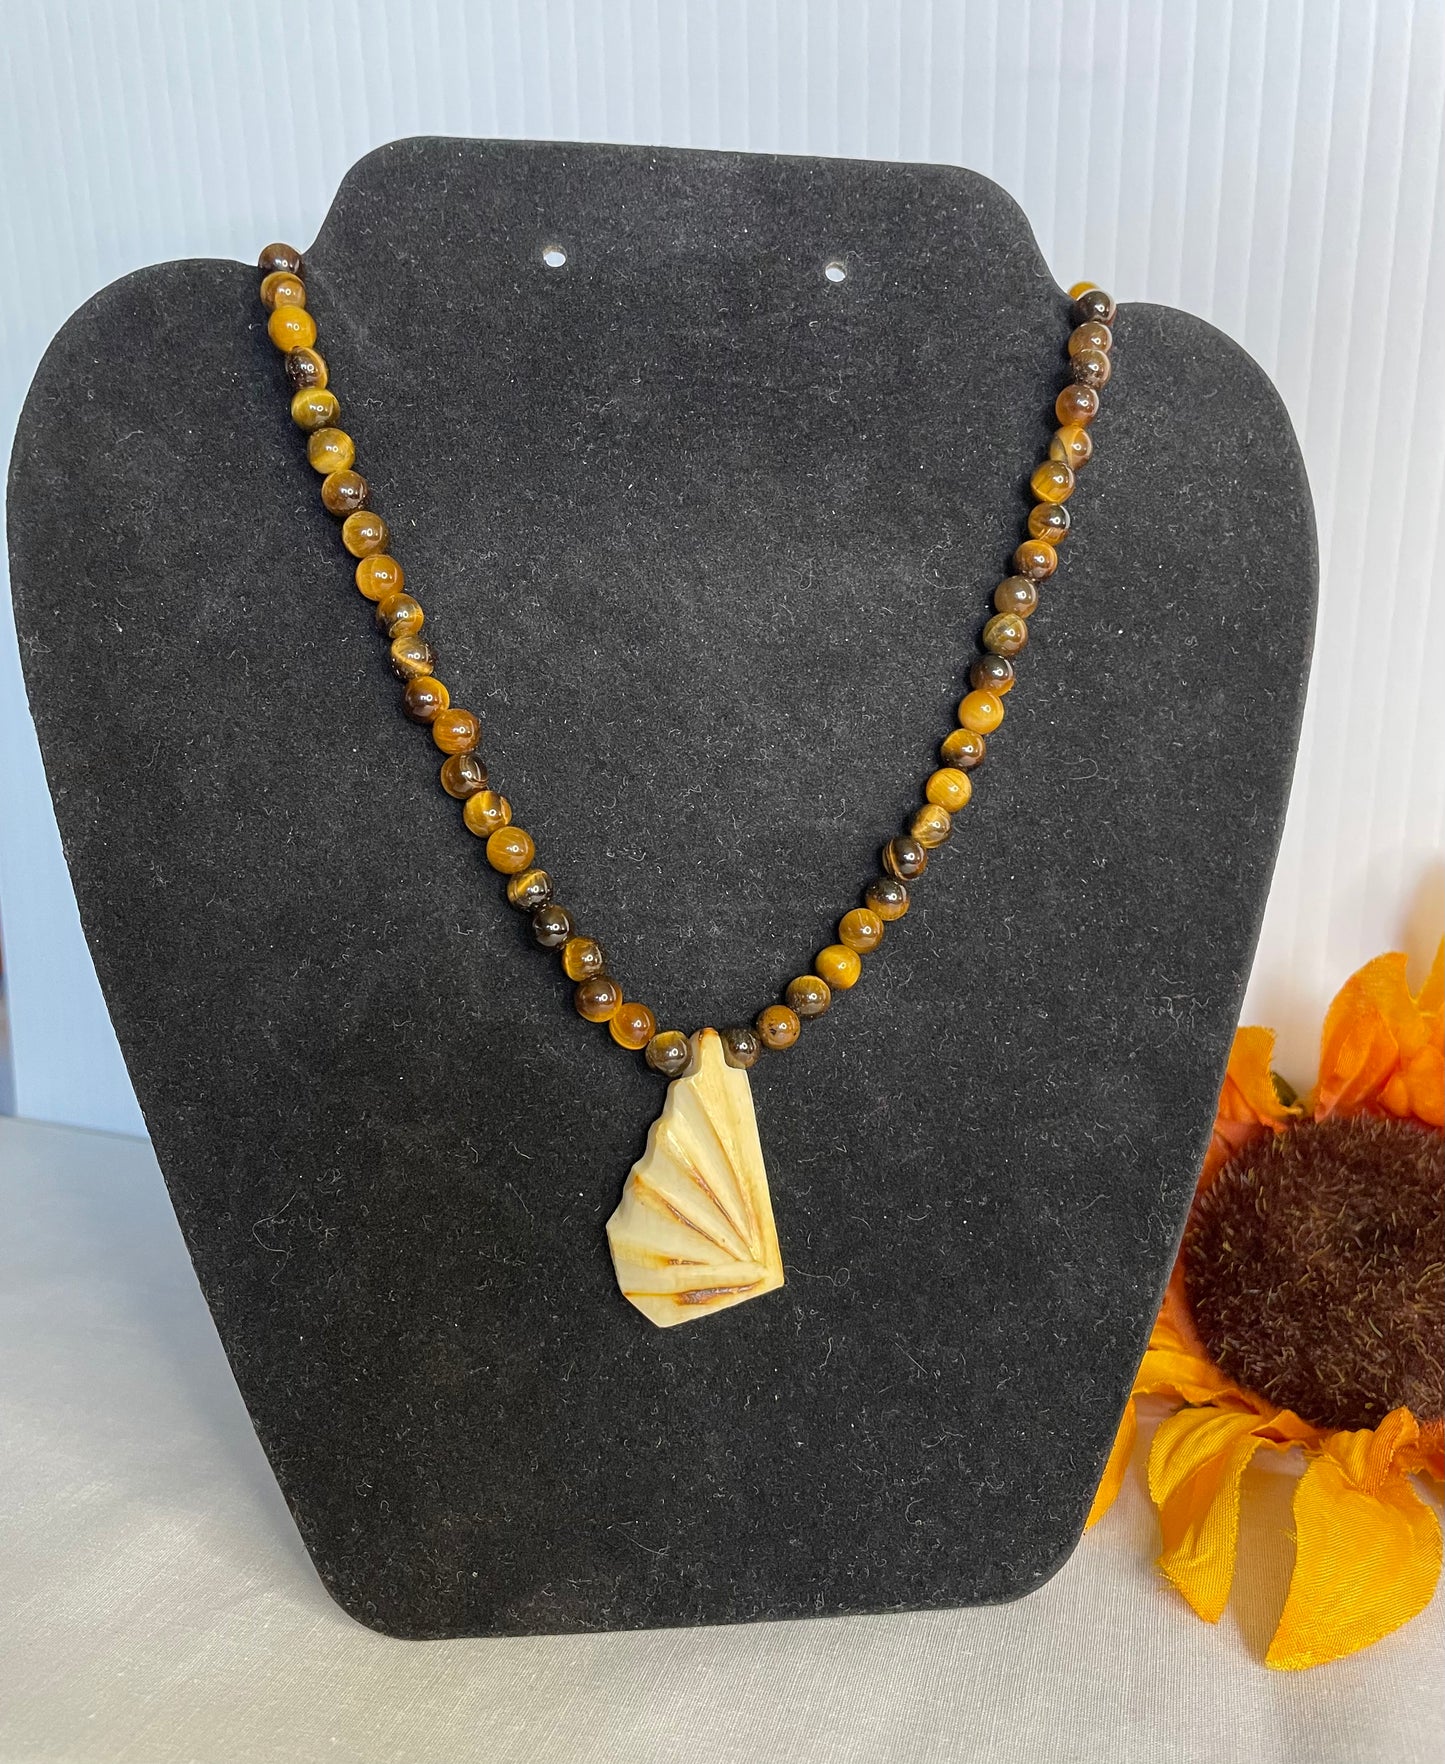 Tiger Eye Stones w/Carved Ivory Pendant, Healing Necklace.